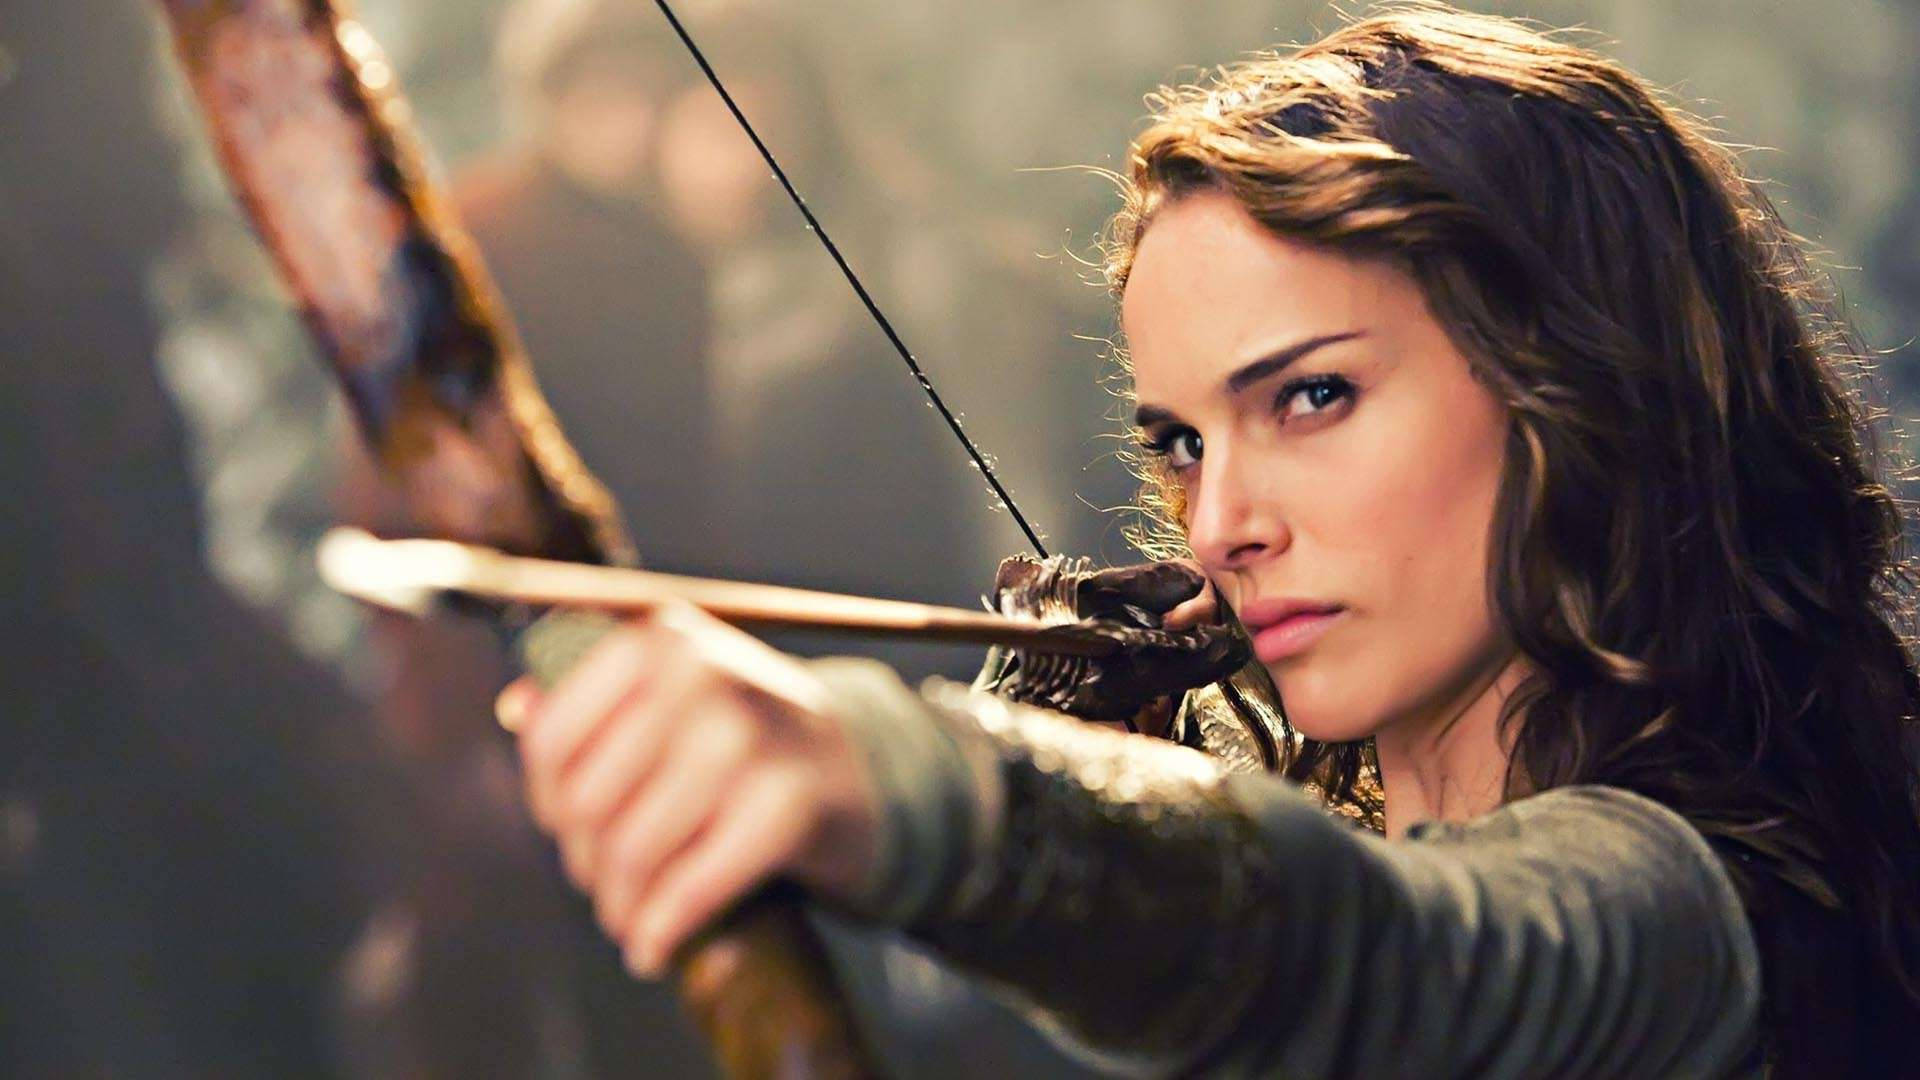 Natalie Portman With Bow And Arrow Background